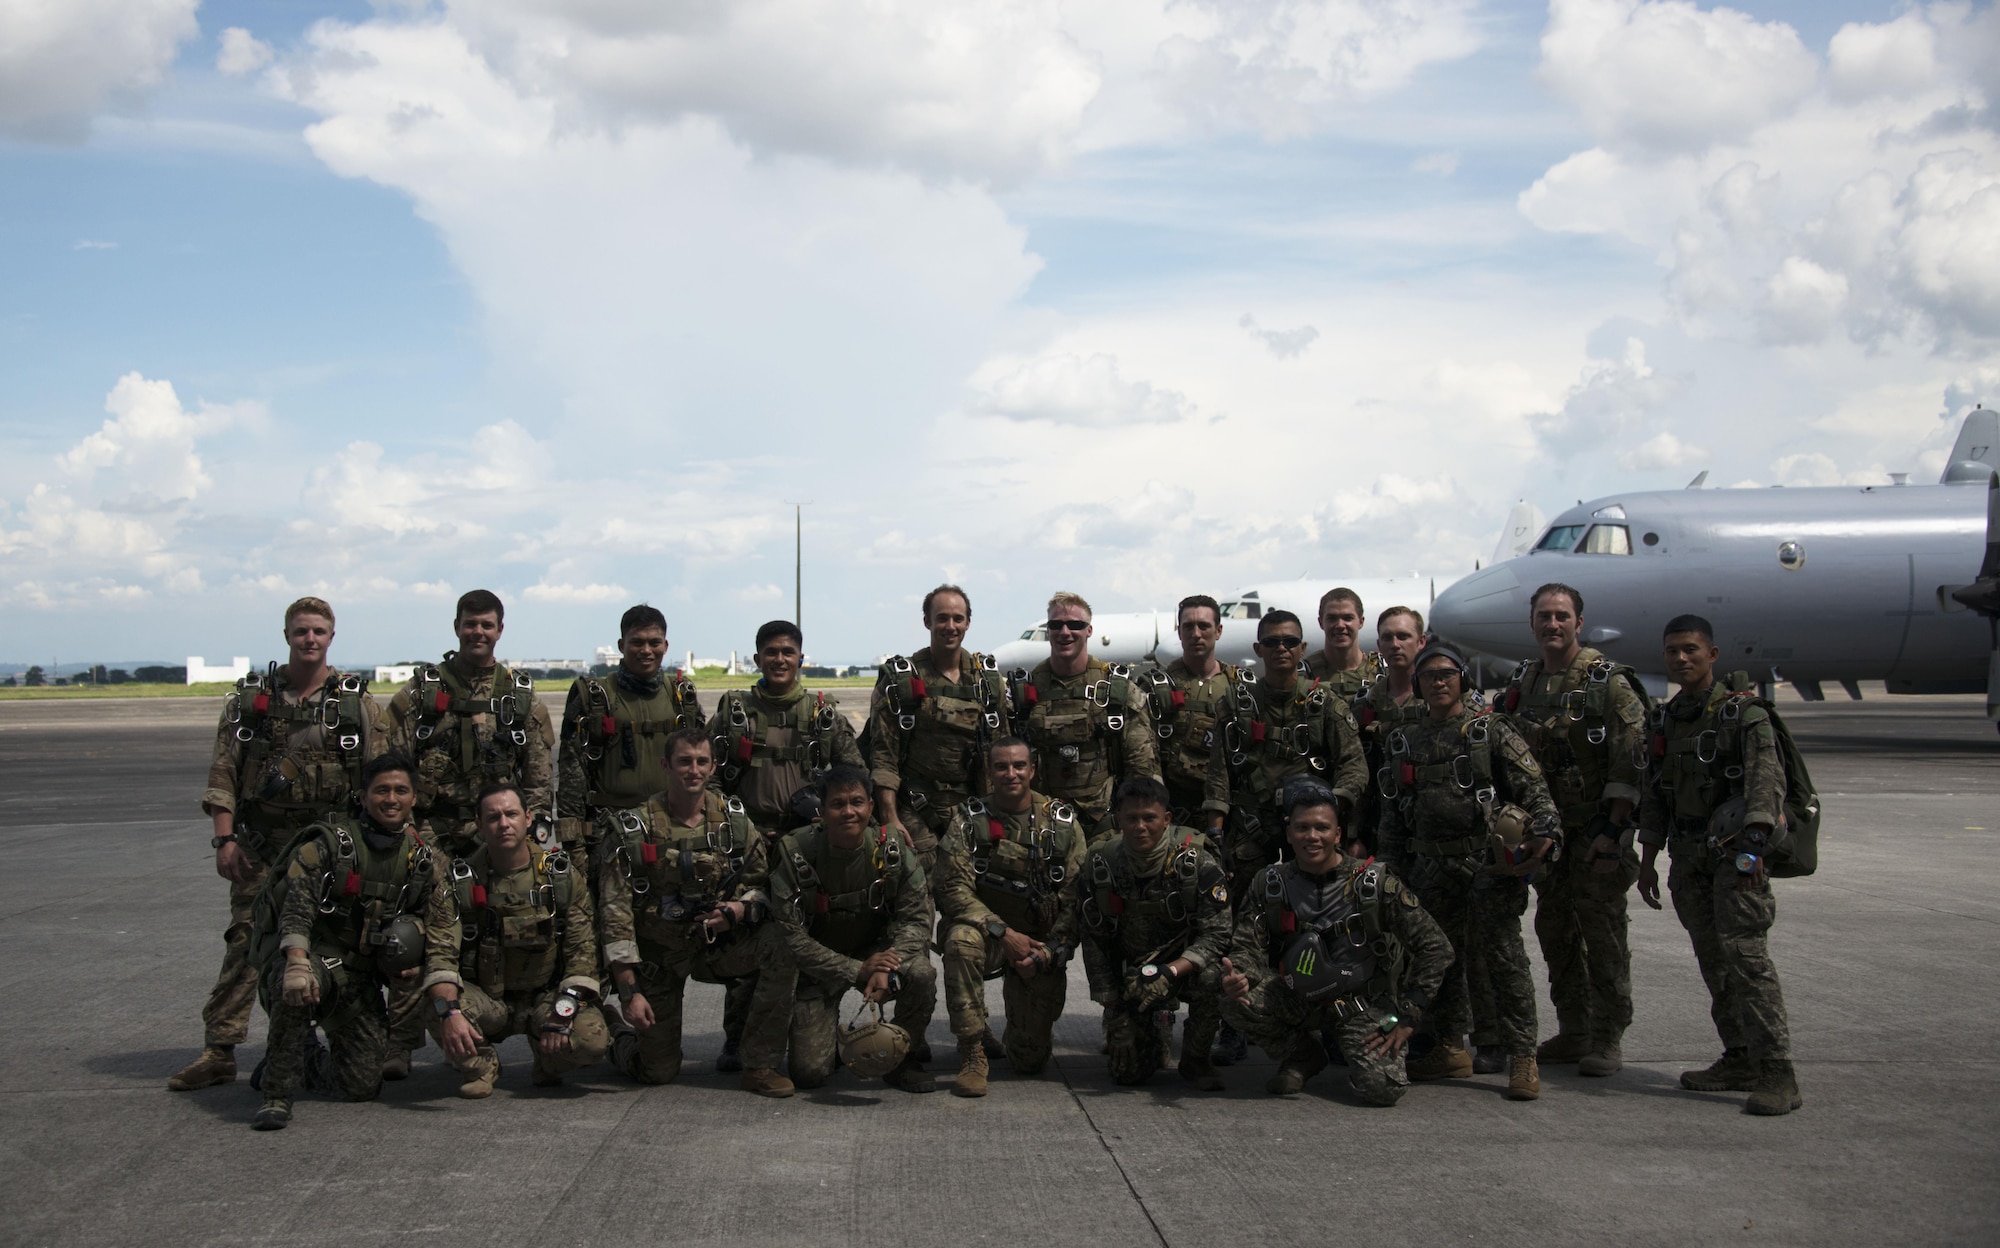 Members from Operational Detachment Alpha (ODA) 1324 and Philippine Army Light Reaction Regiment (LRR) pose for a group photo at Clark Air Base, Sept. 24. Air Commandos from the 353rd Special Operations Group supported high-altitude, low-opening (HALO) airdrops into Crow Valley in Tarlac Province, Philippines with joint and combined partners during Teak Piston 2016. ODA 1324 is a part of the United States Army's Third Battalion, 1st Special Forces Group Airborne. (U.S. Air Force photo by Capt. Jessica Tait)